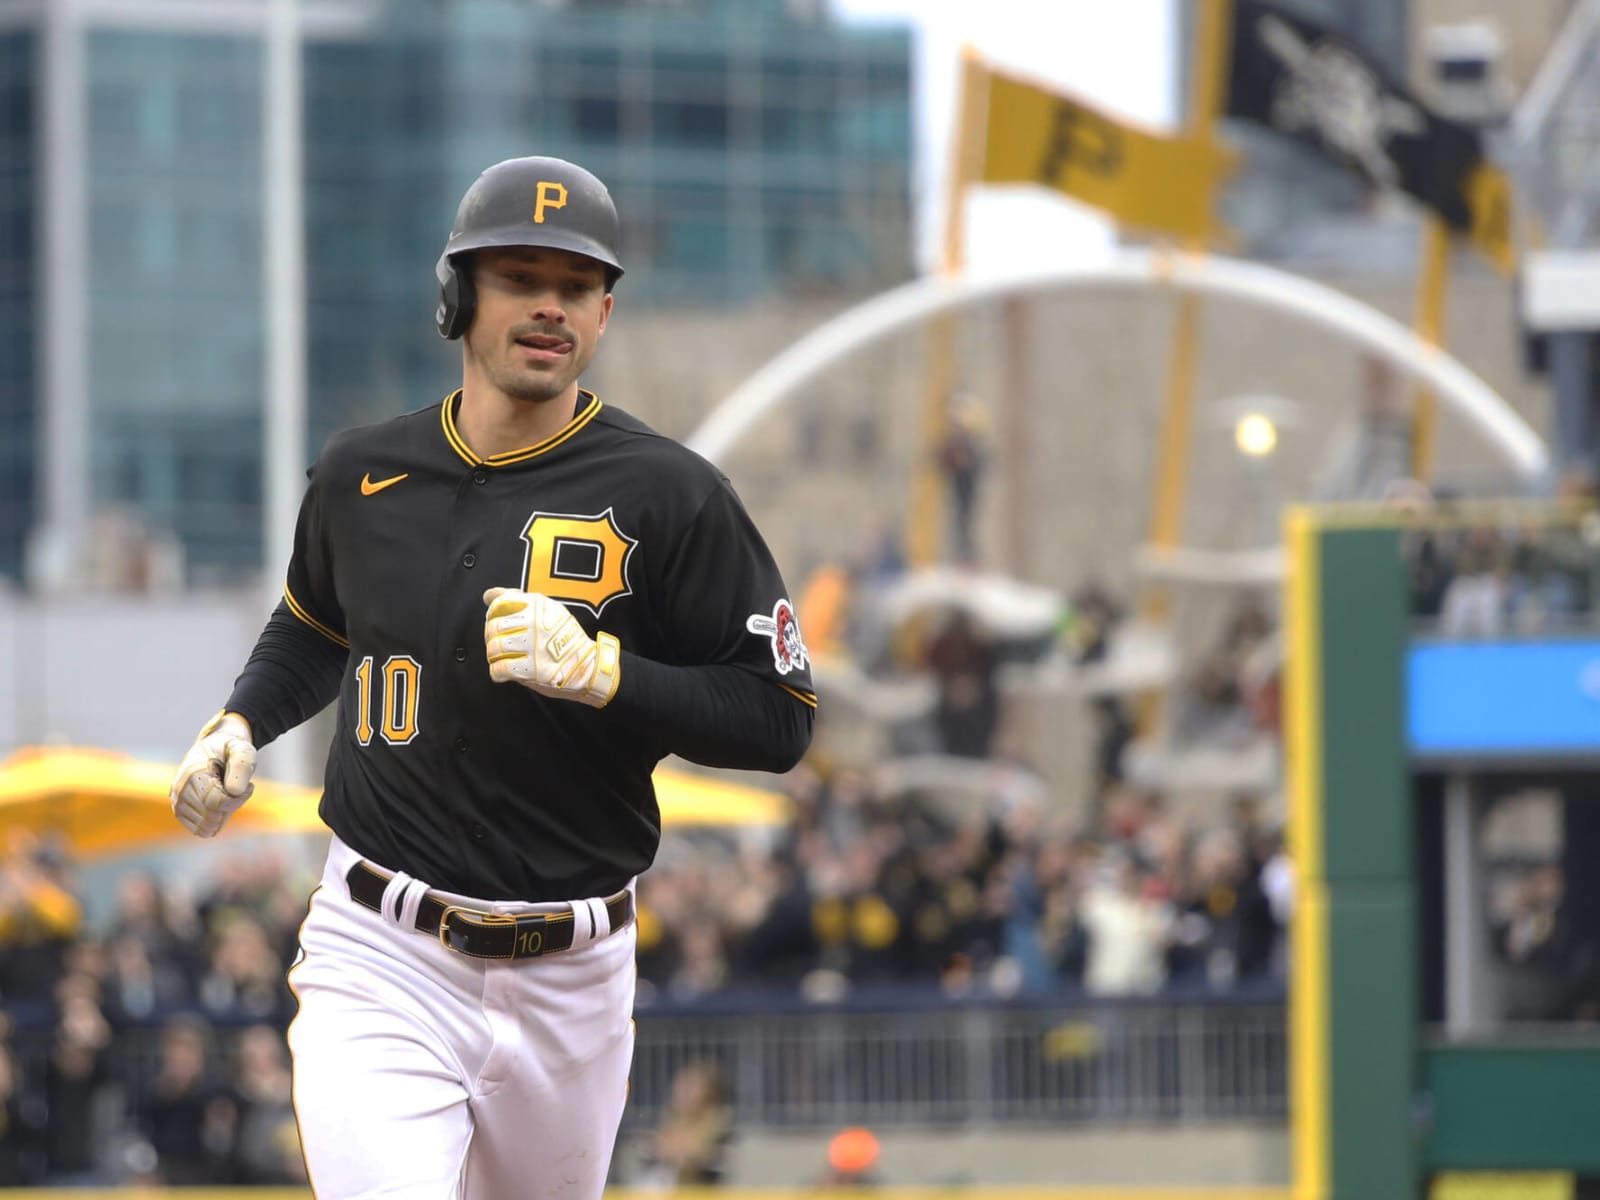 Bryan Reynolds extension: Pirates lock up outfielder on $106M deal